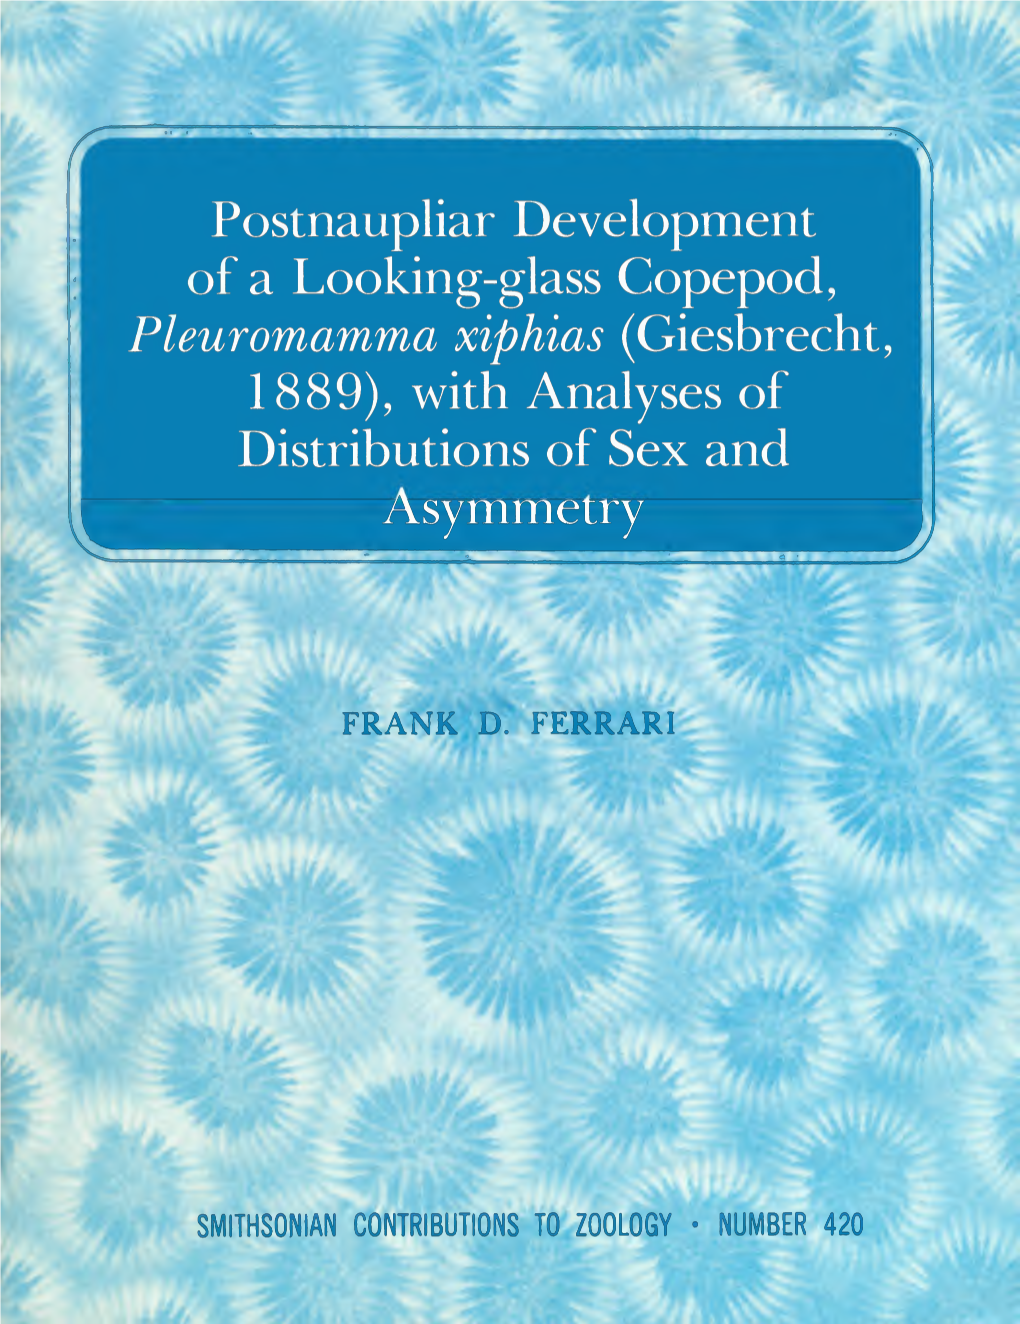 Postnaupliar Development of a Looking-Glass Copepod, Pleuromamma Xiphias (Giesbrecht, 1889), with Analyses of Distributions of Sex and Asymmetry